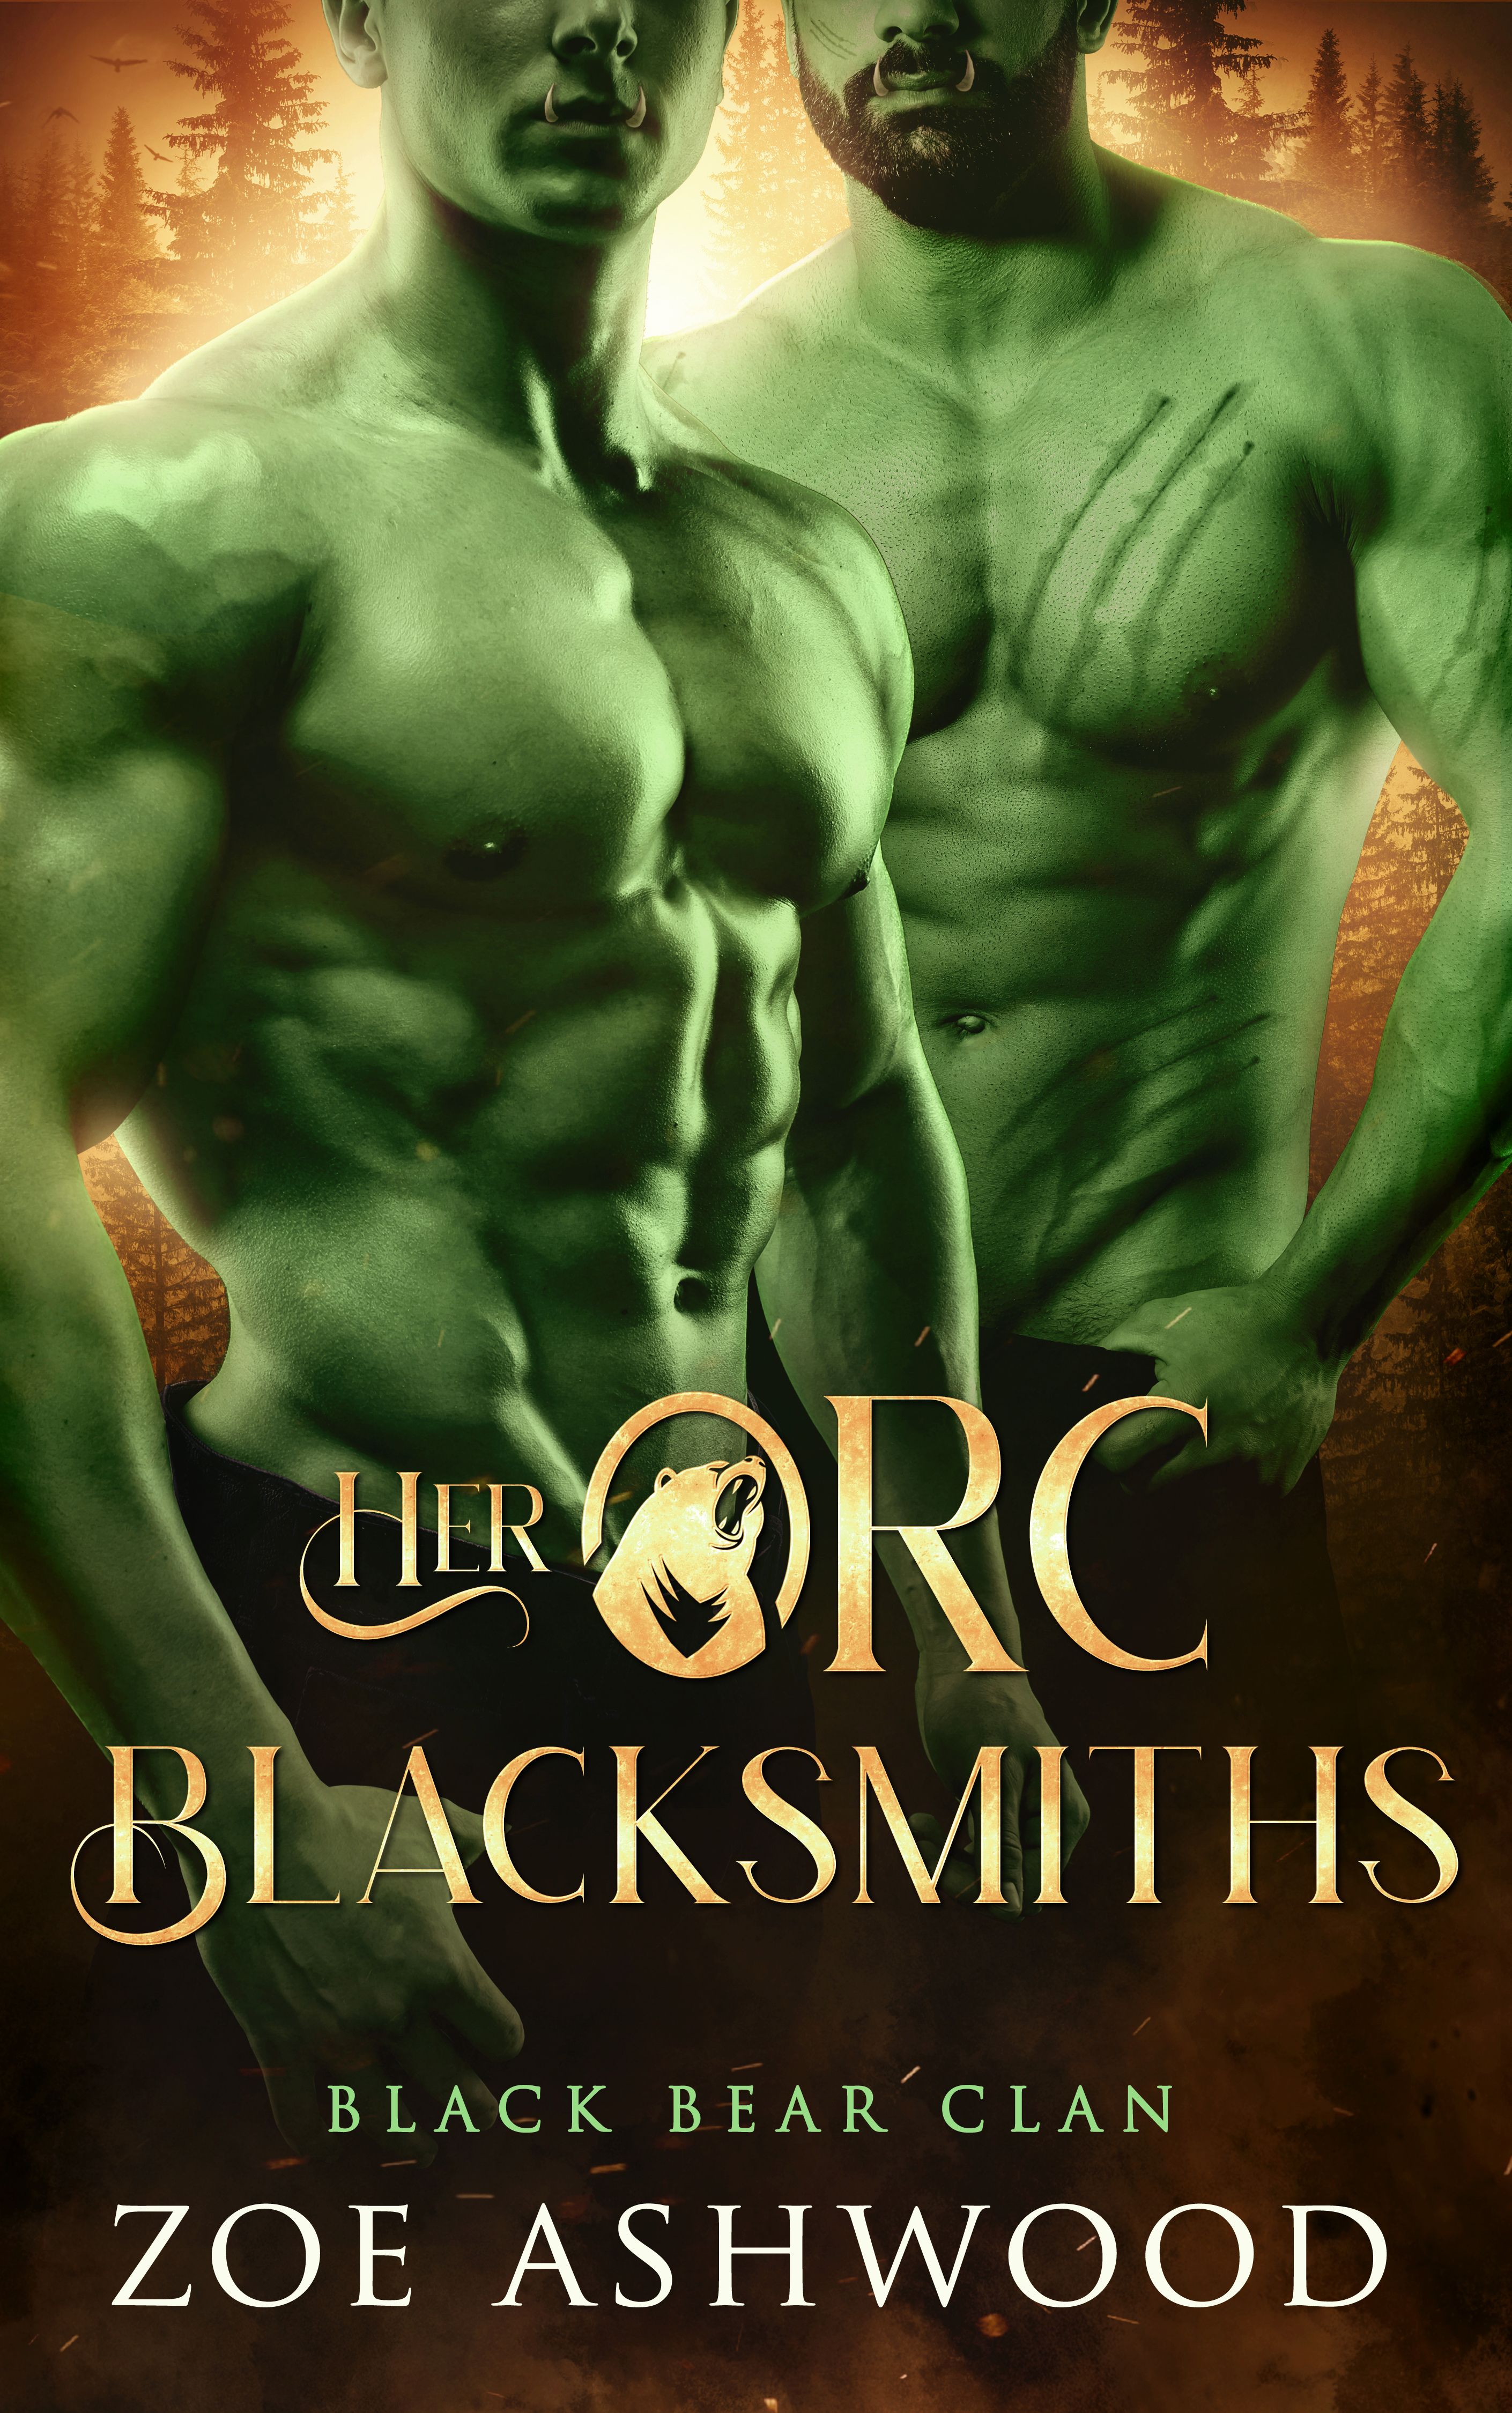 Her Orc Blacksmiths by Zoe Ashwood - an orc fantasy romance